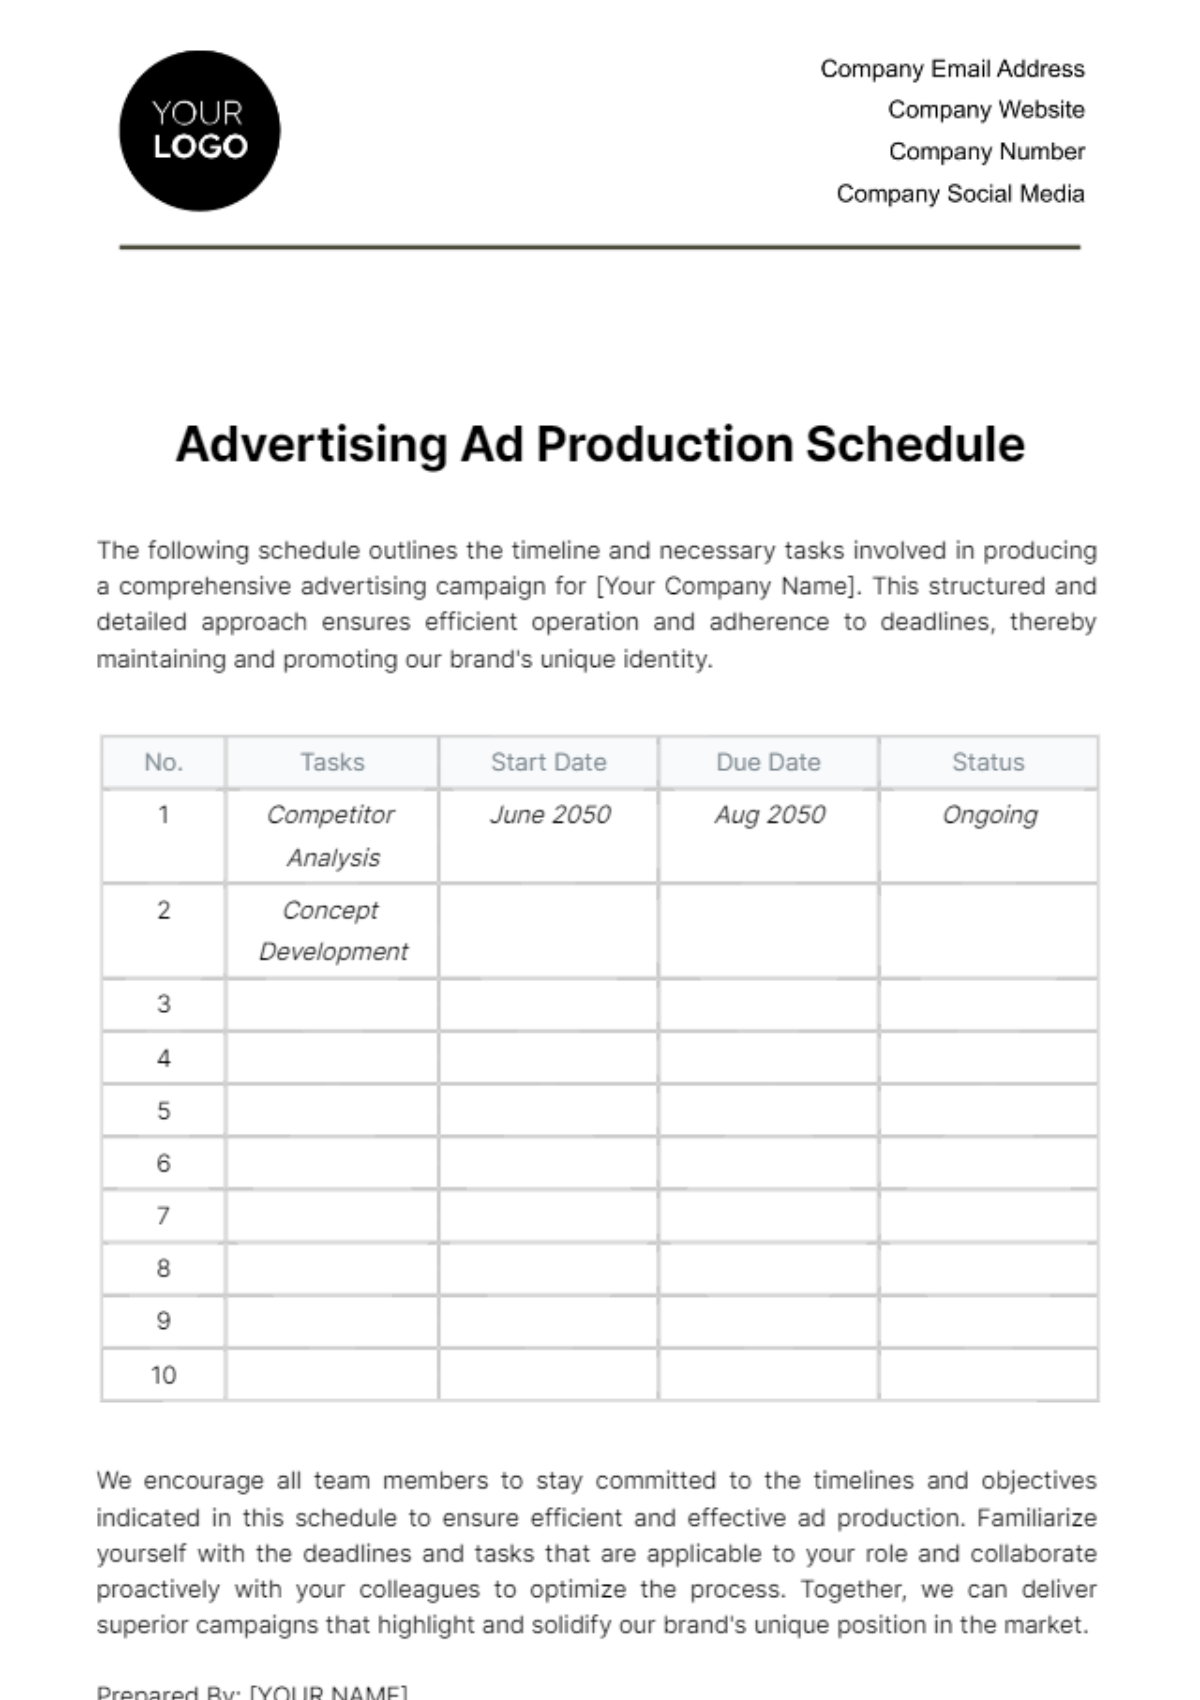 Advertising Ad Production Schedule Template